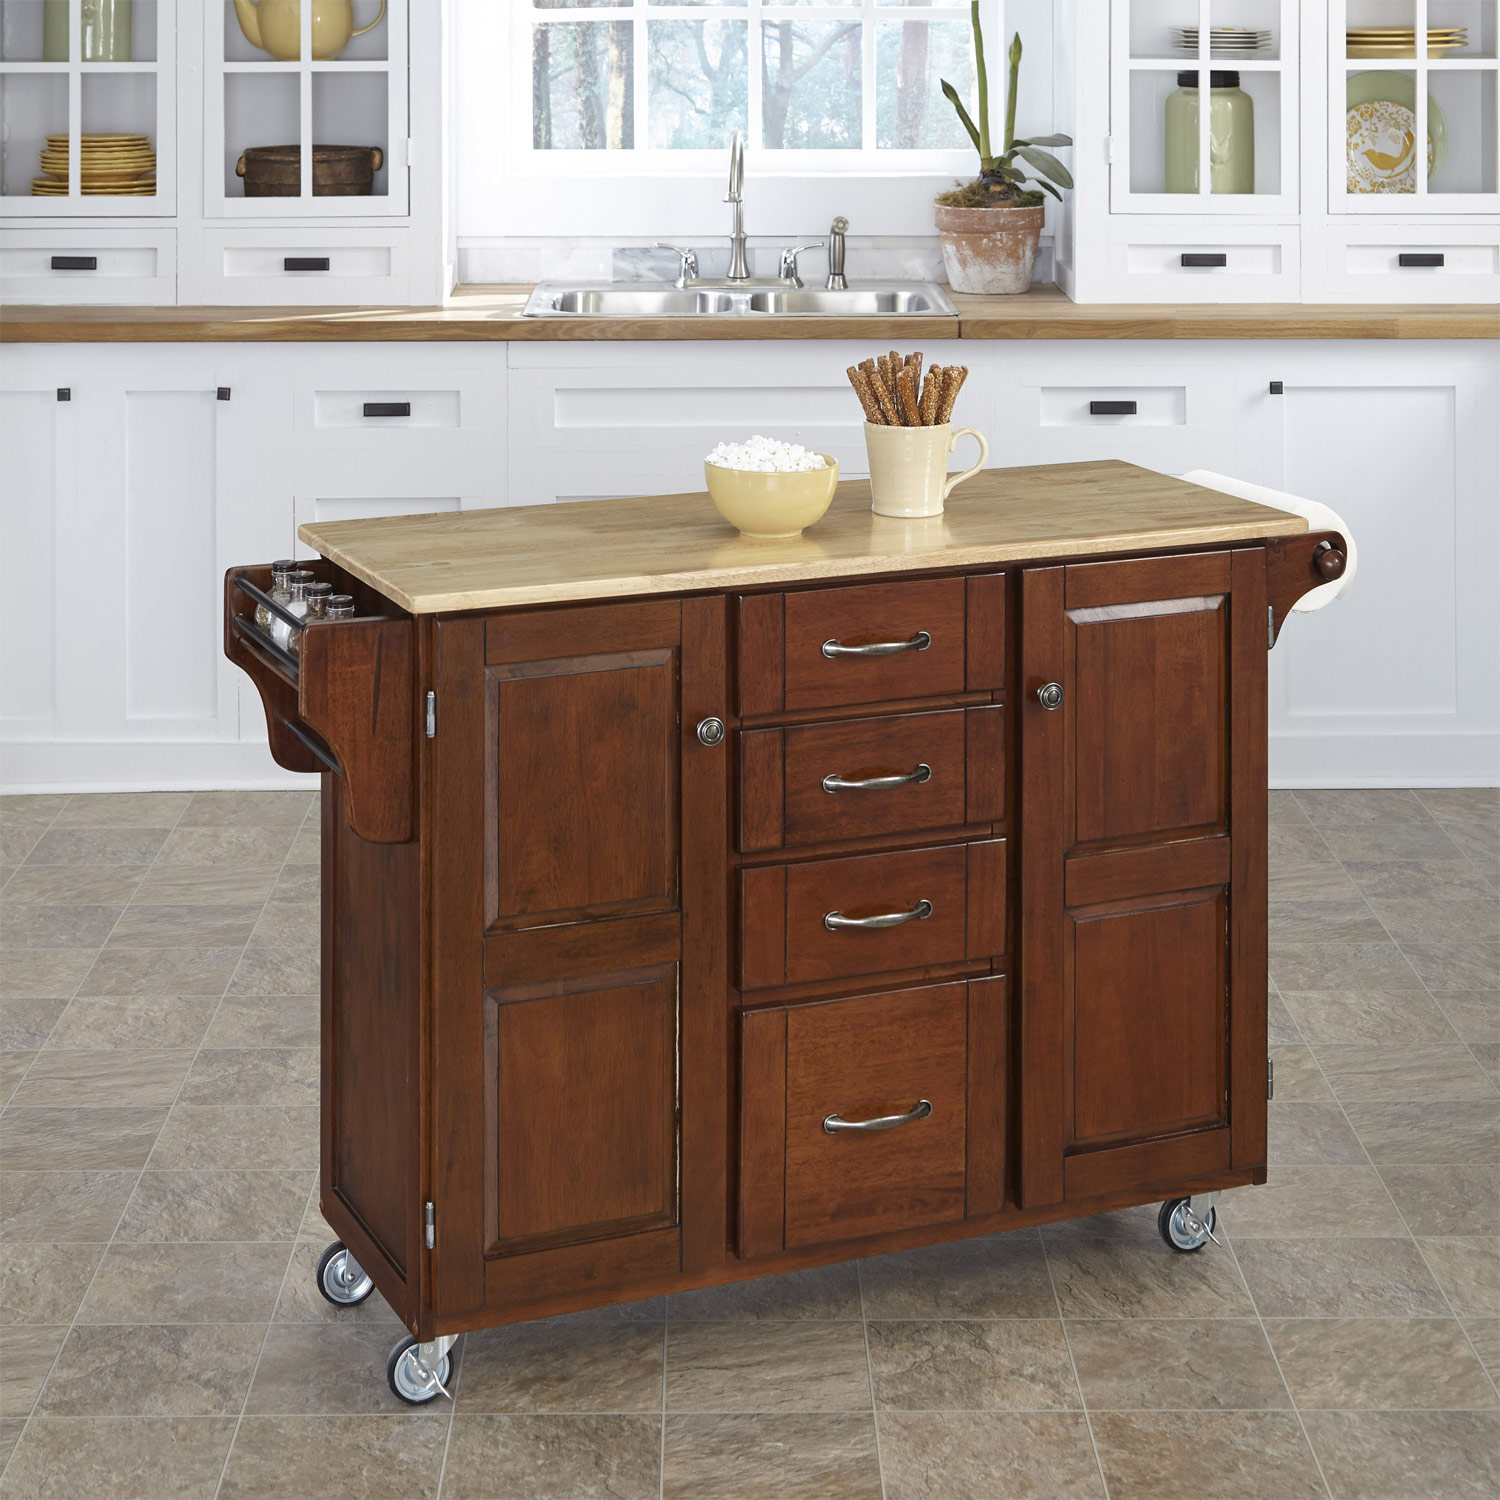 Home Styles Create-A-Cart with Wood Top - Cherry